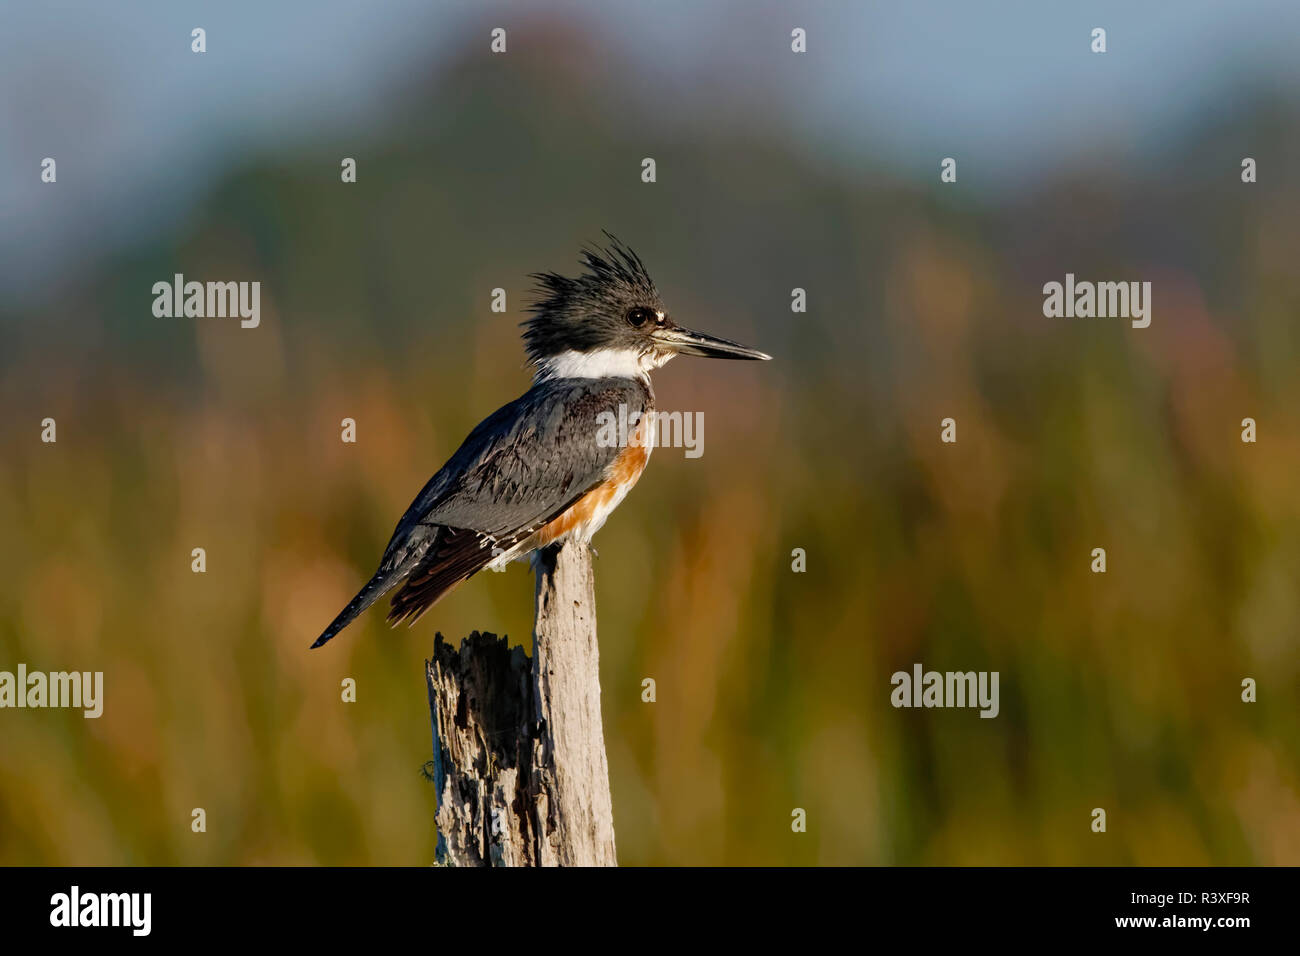 Female belted kingfisher, Megaceryle alcyon, Ritch Grissom Memorial Wetlands, Florida. Stock Photo